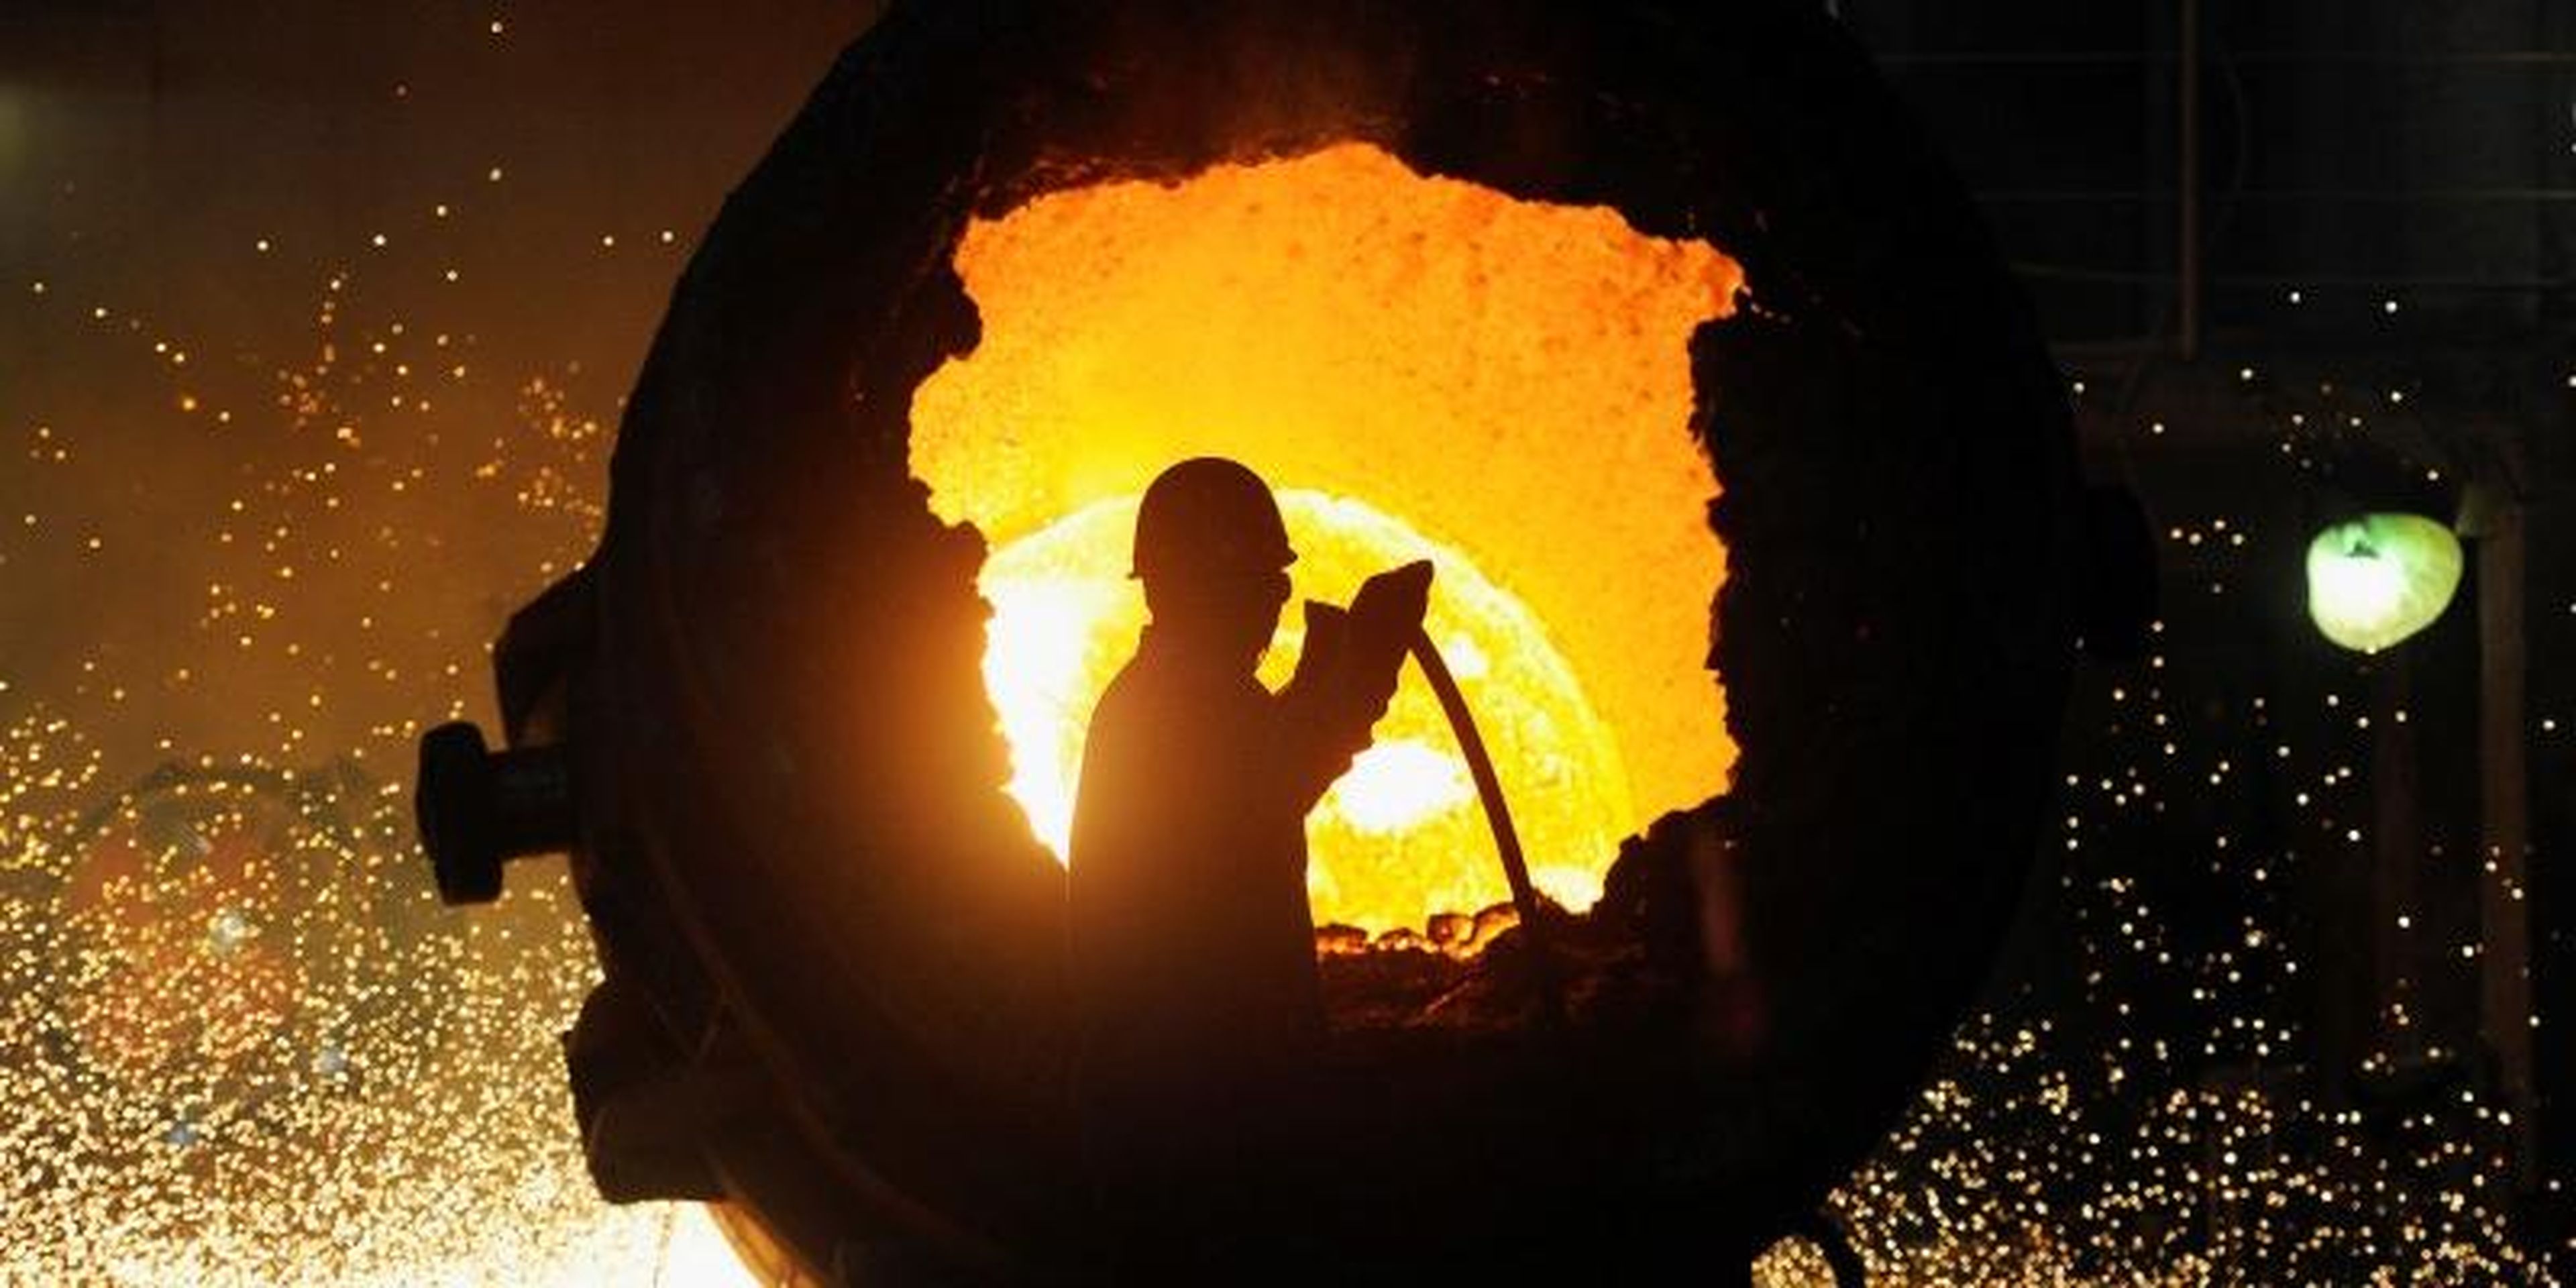 FILE PHOTO: A worker operates a furnace at a steel plant in Hefei